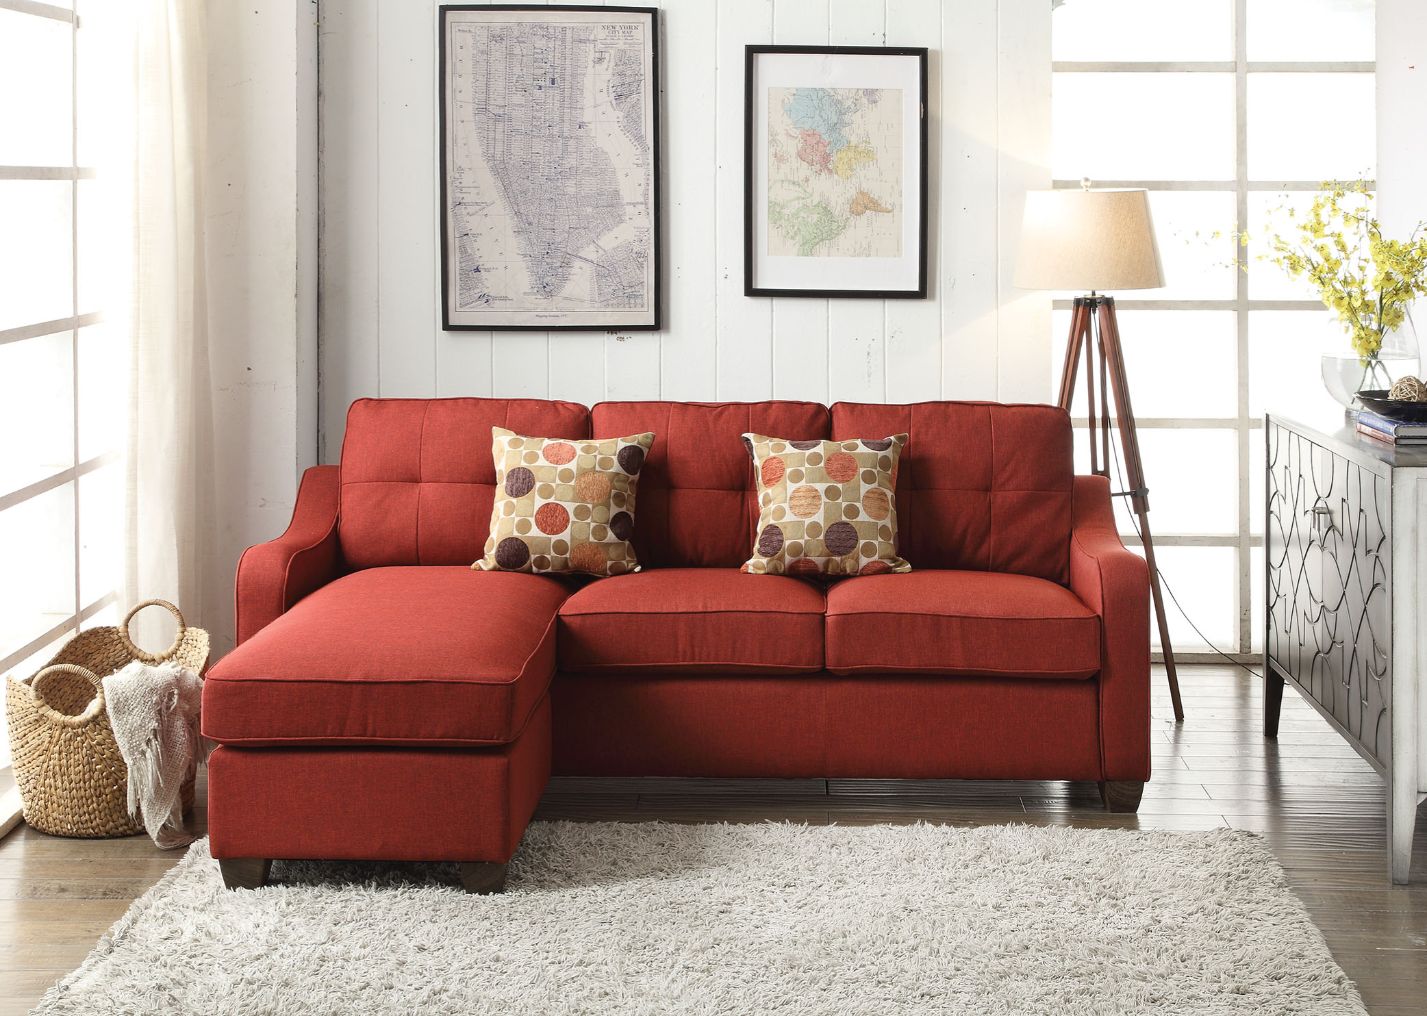 ACME Furniture Sofas & Couches - Cleavon II Sectional Sofa & 2 Pillows, Red Linen (53740)